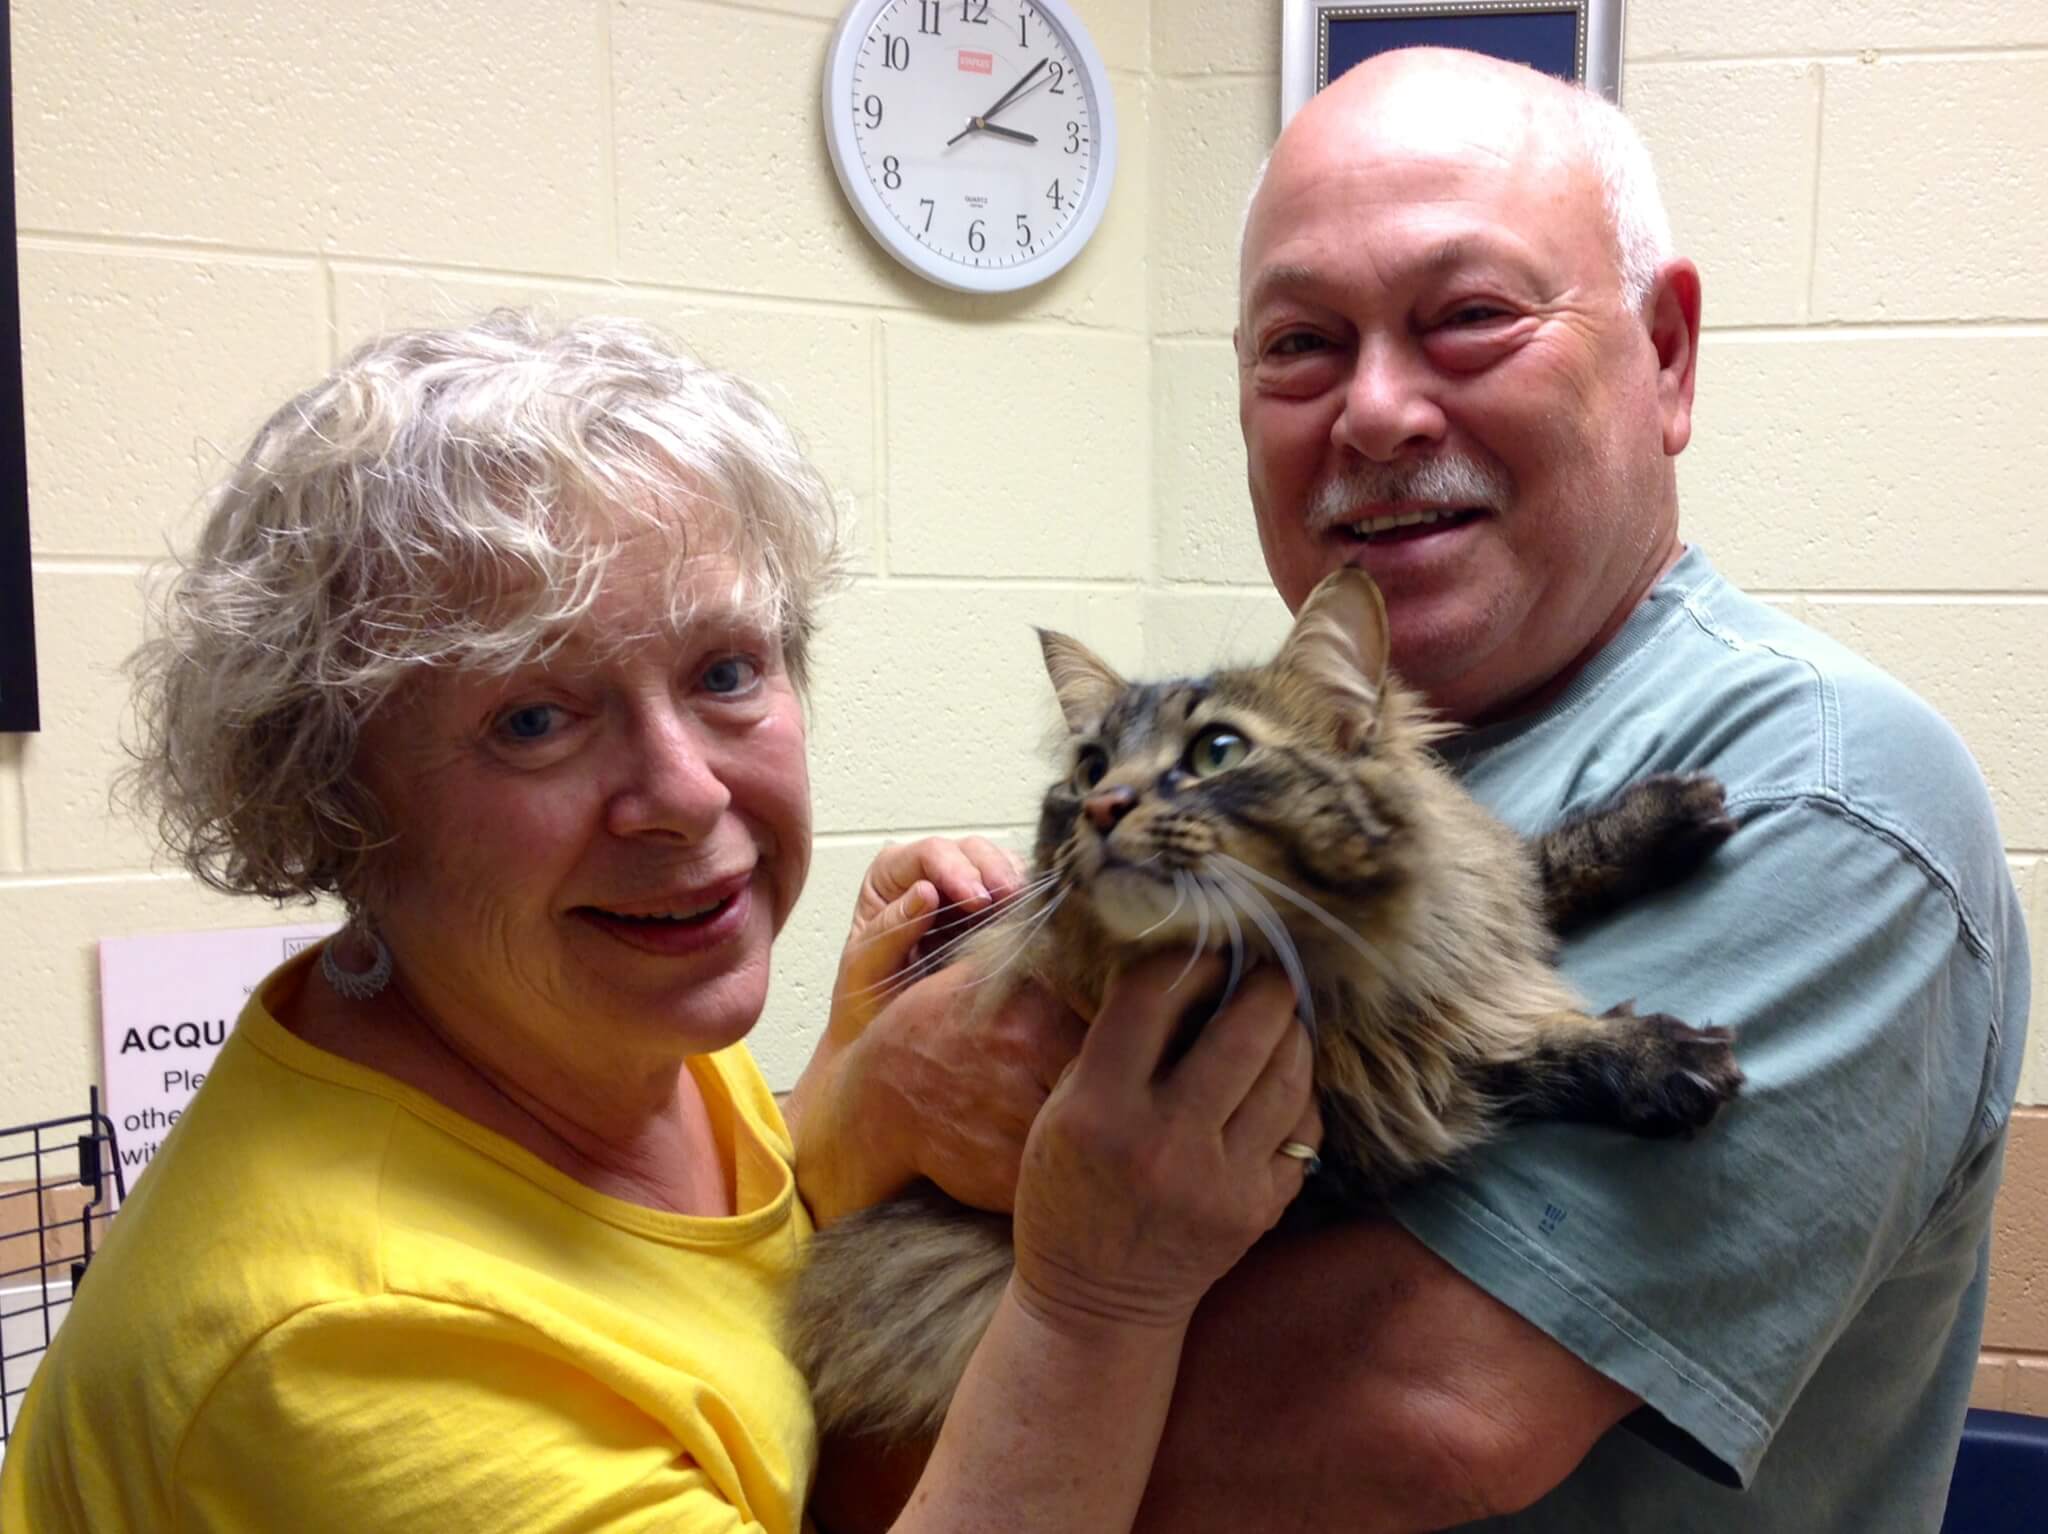 Tasha and her new parents are the "purrfect" match!